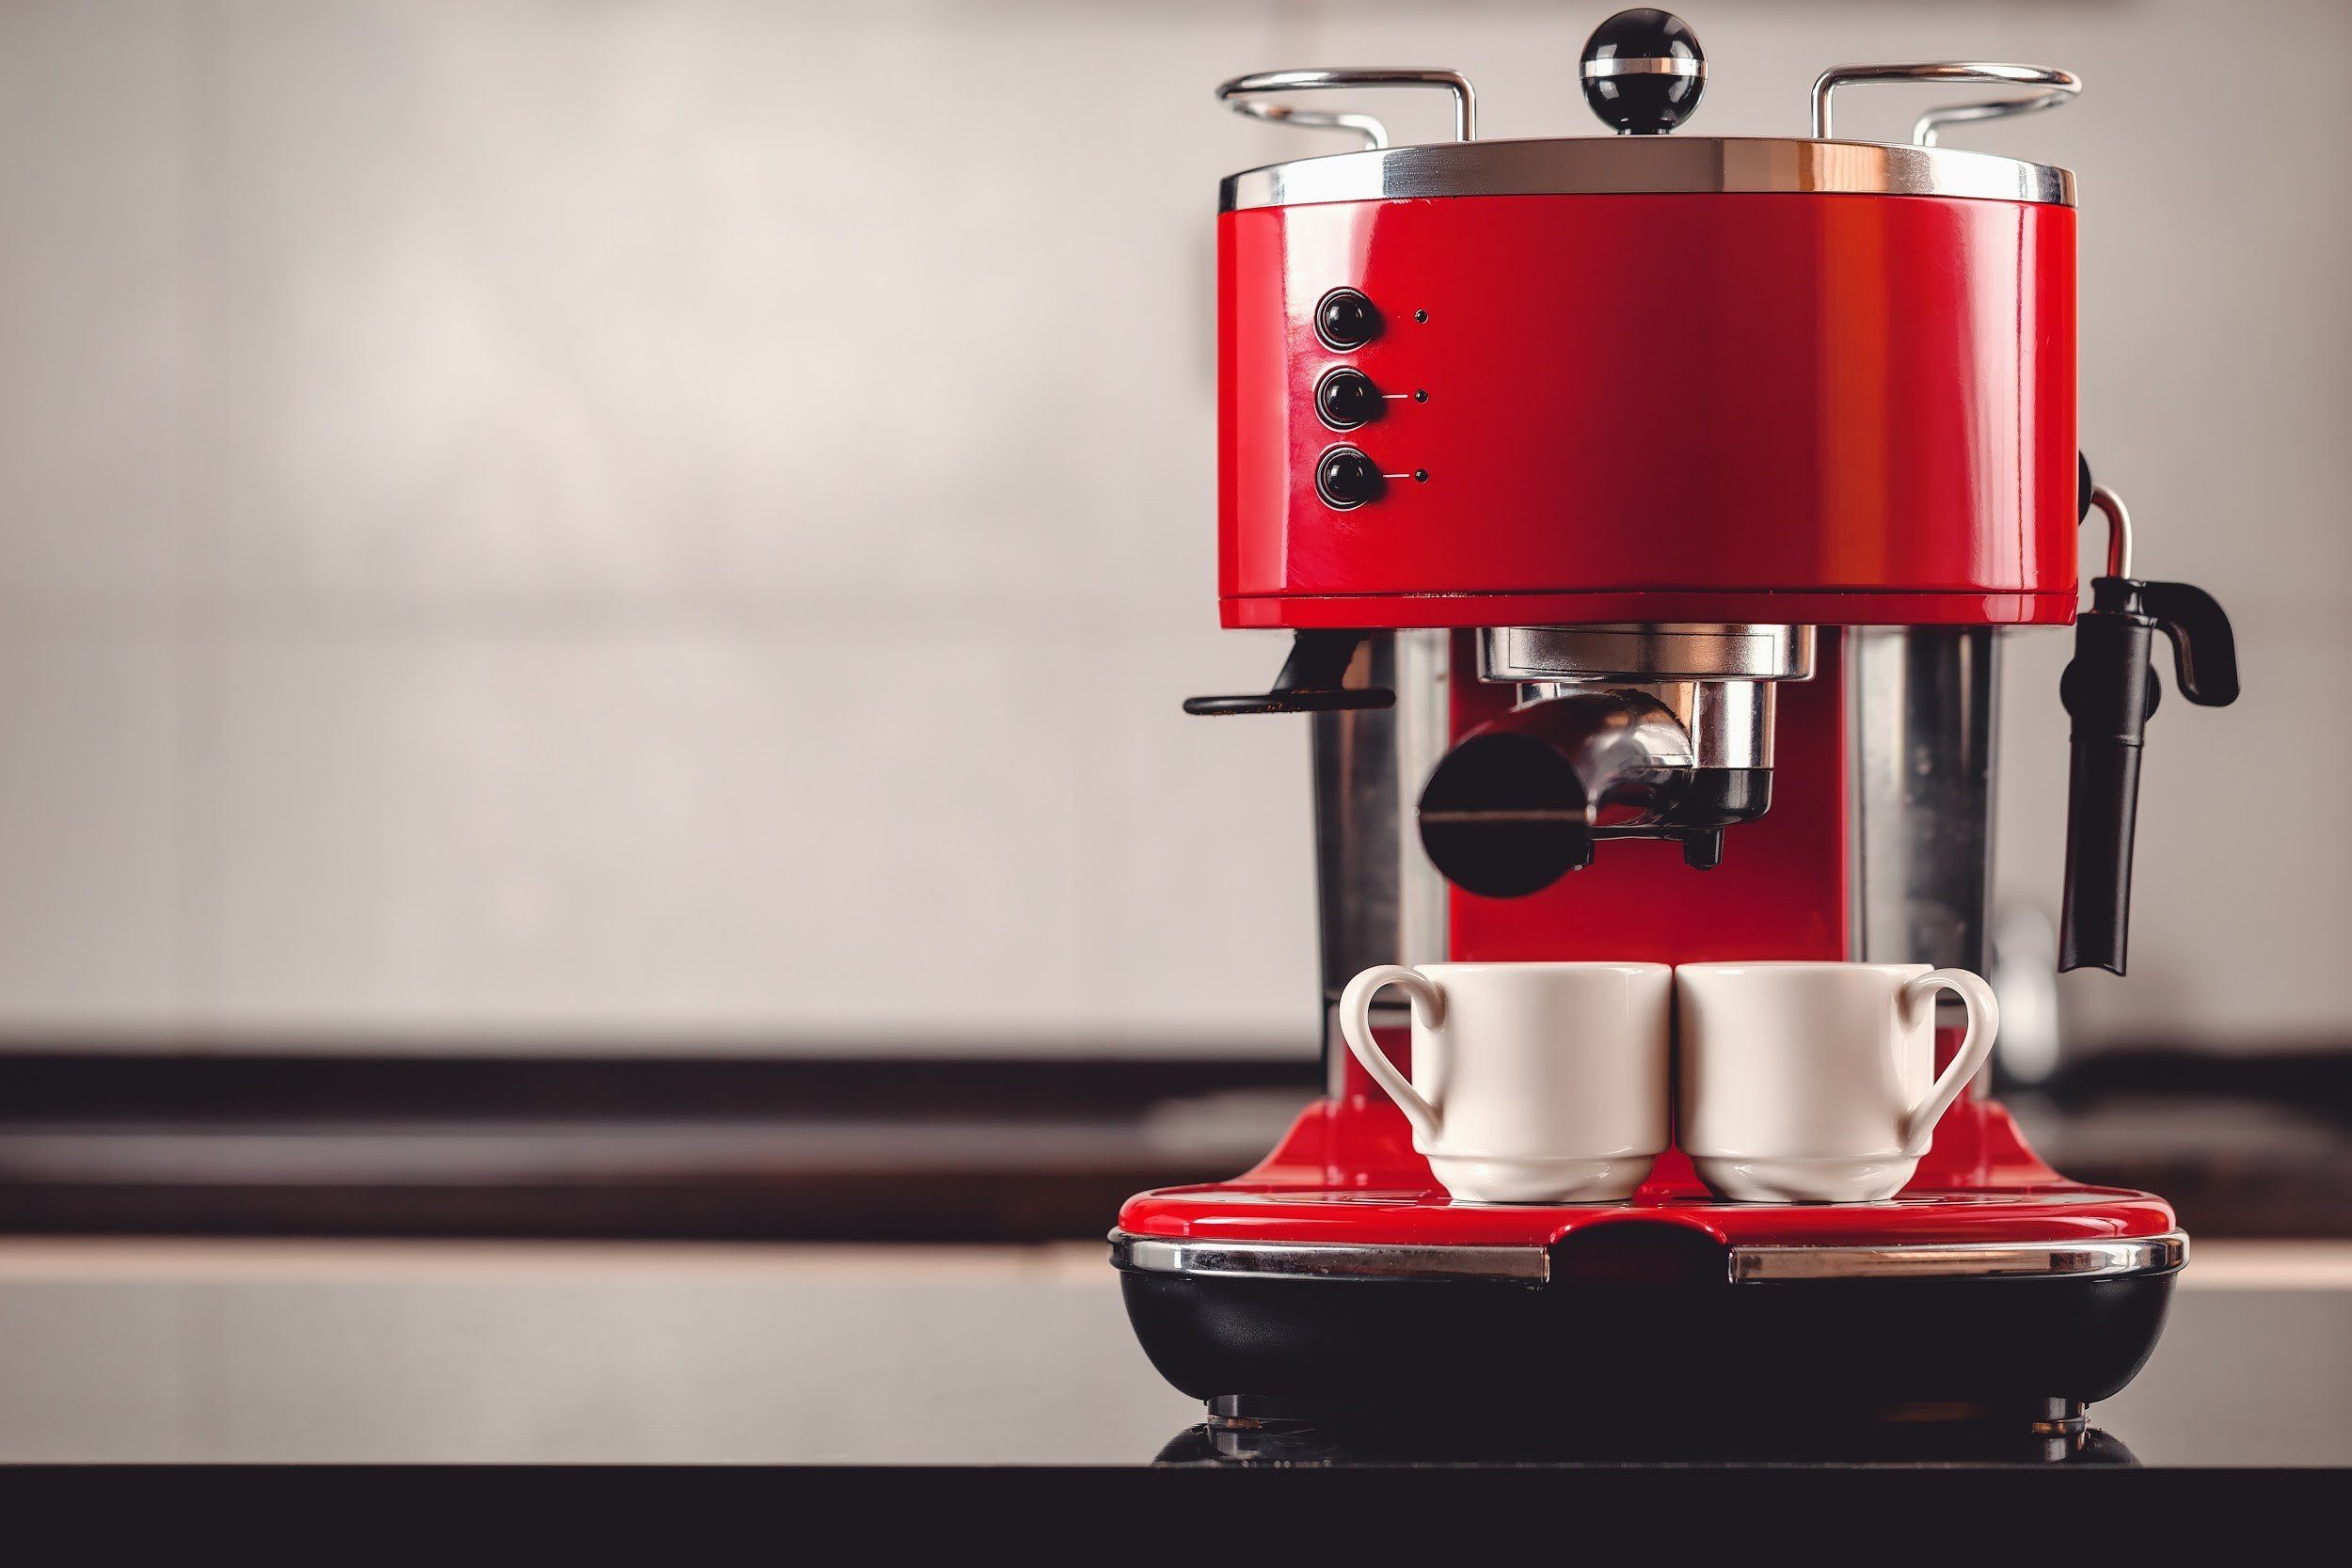 The Perfect Home Espresso Machine For Beginners?